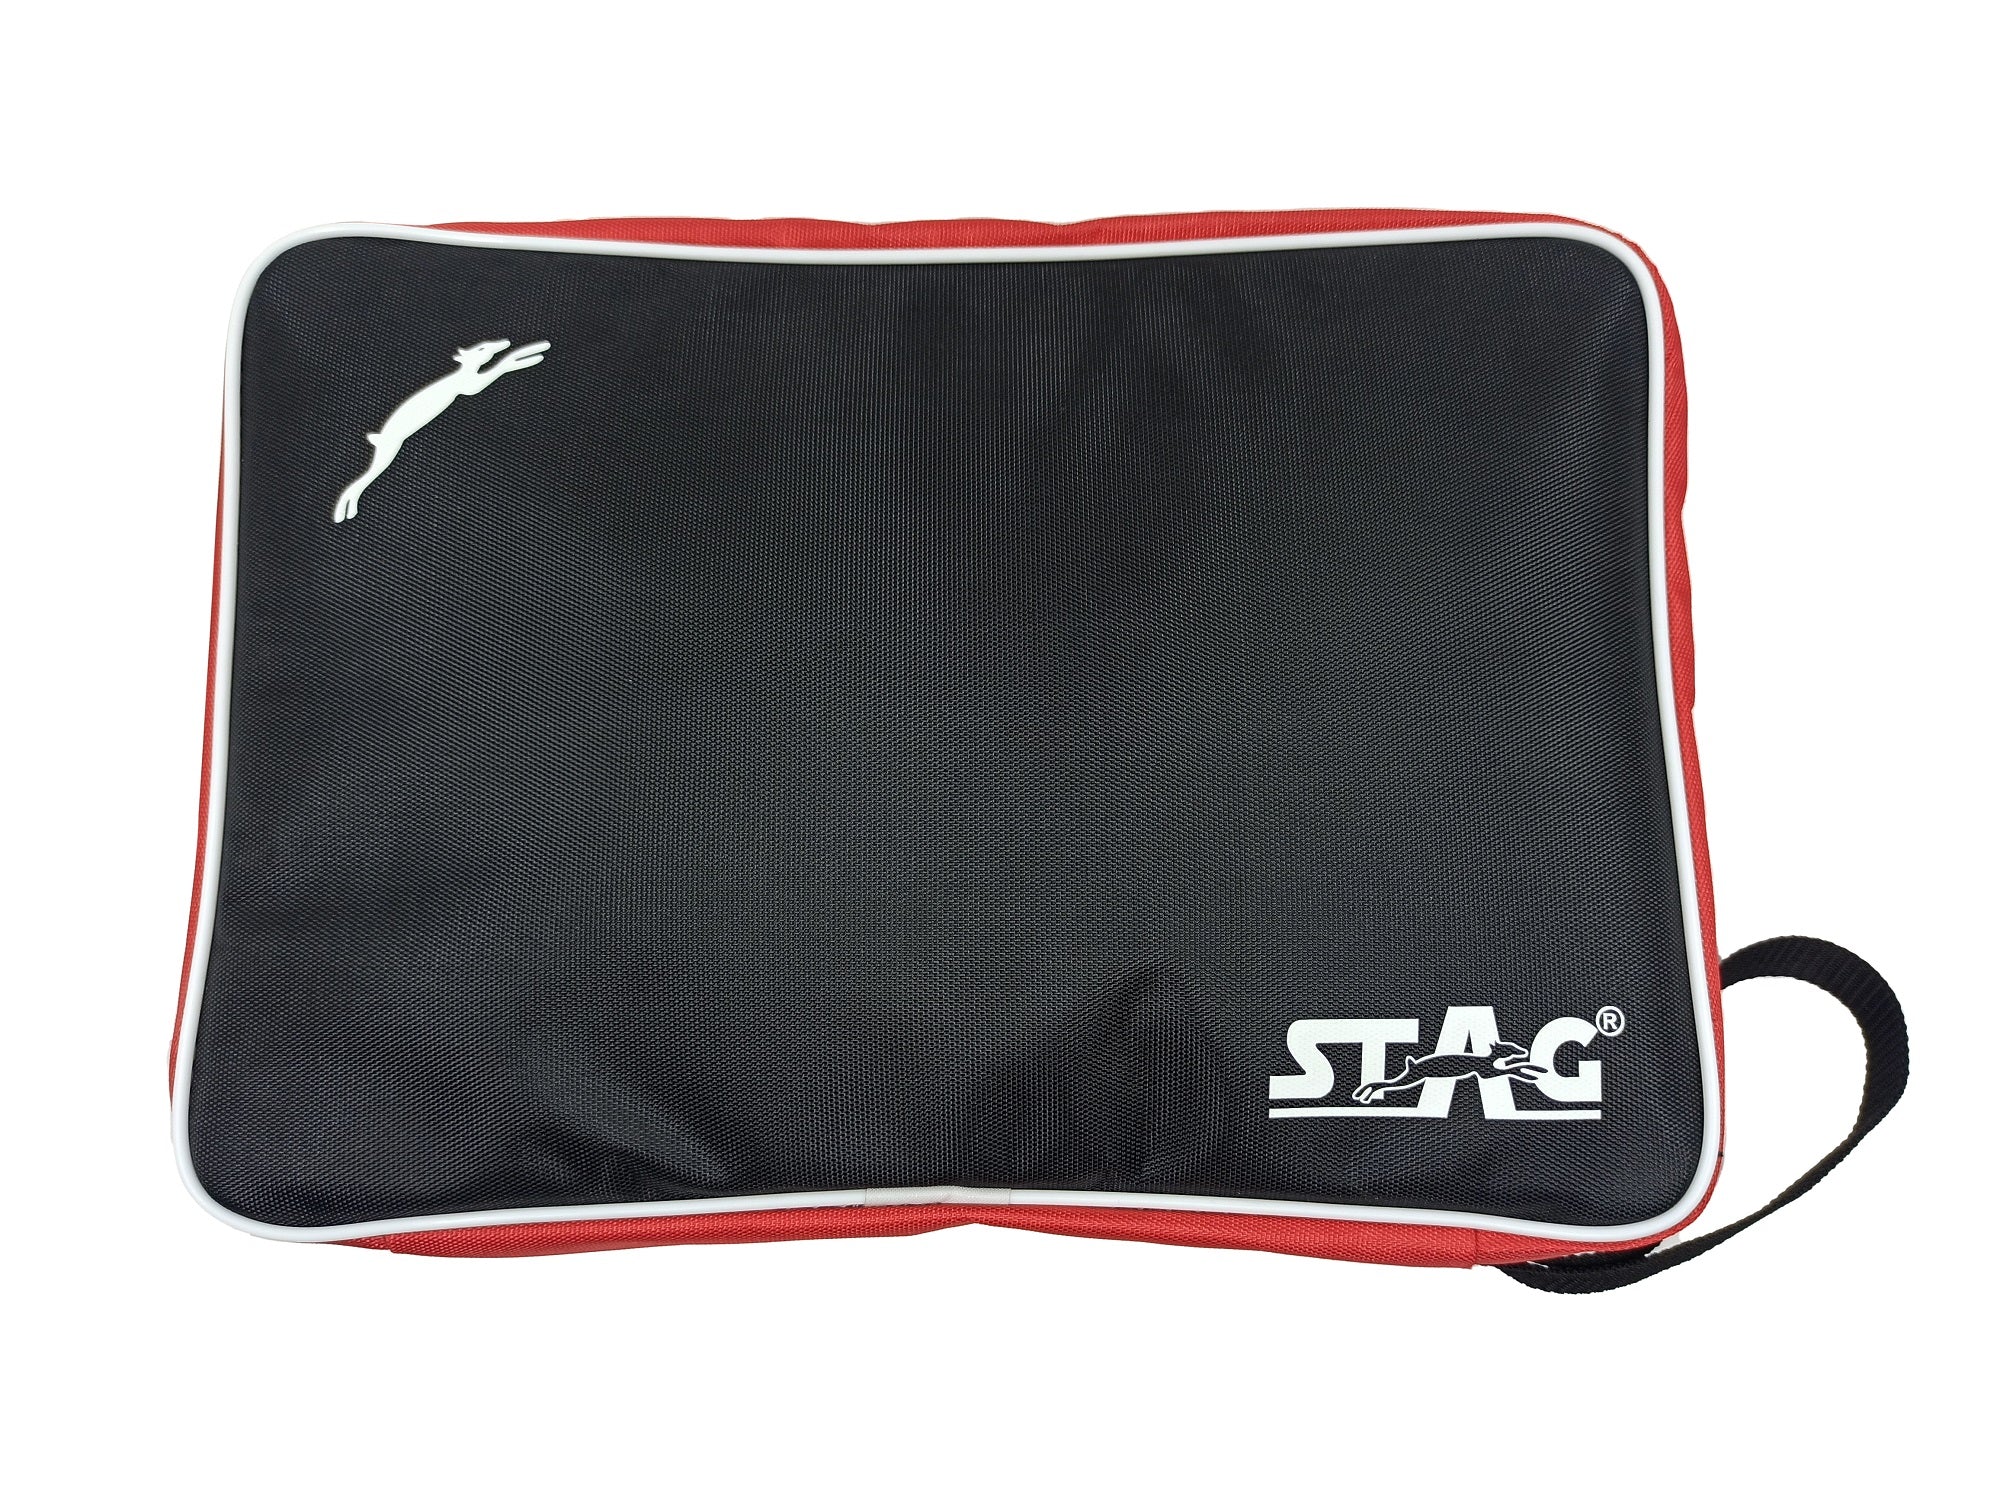 Stag Double Chain Deluxe Racket Case with Pocket for Accessories (Only